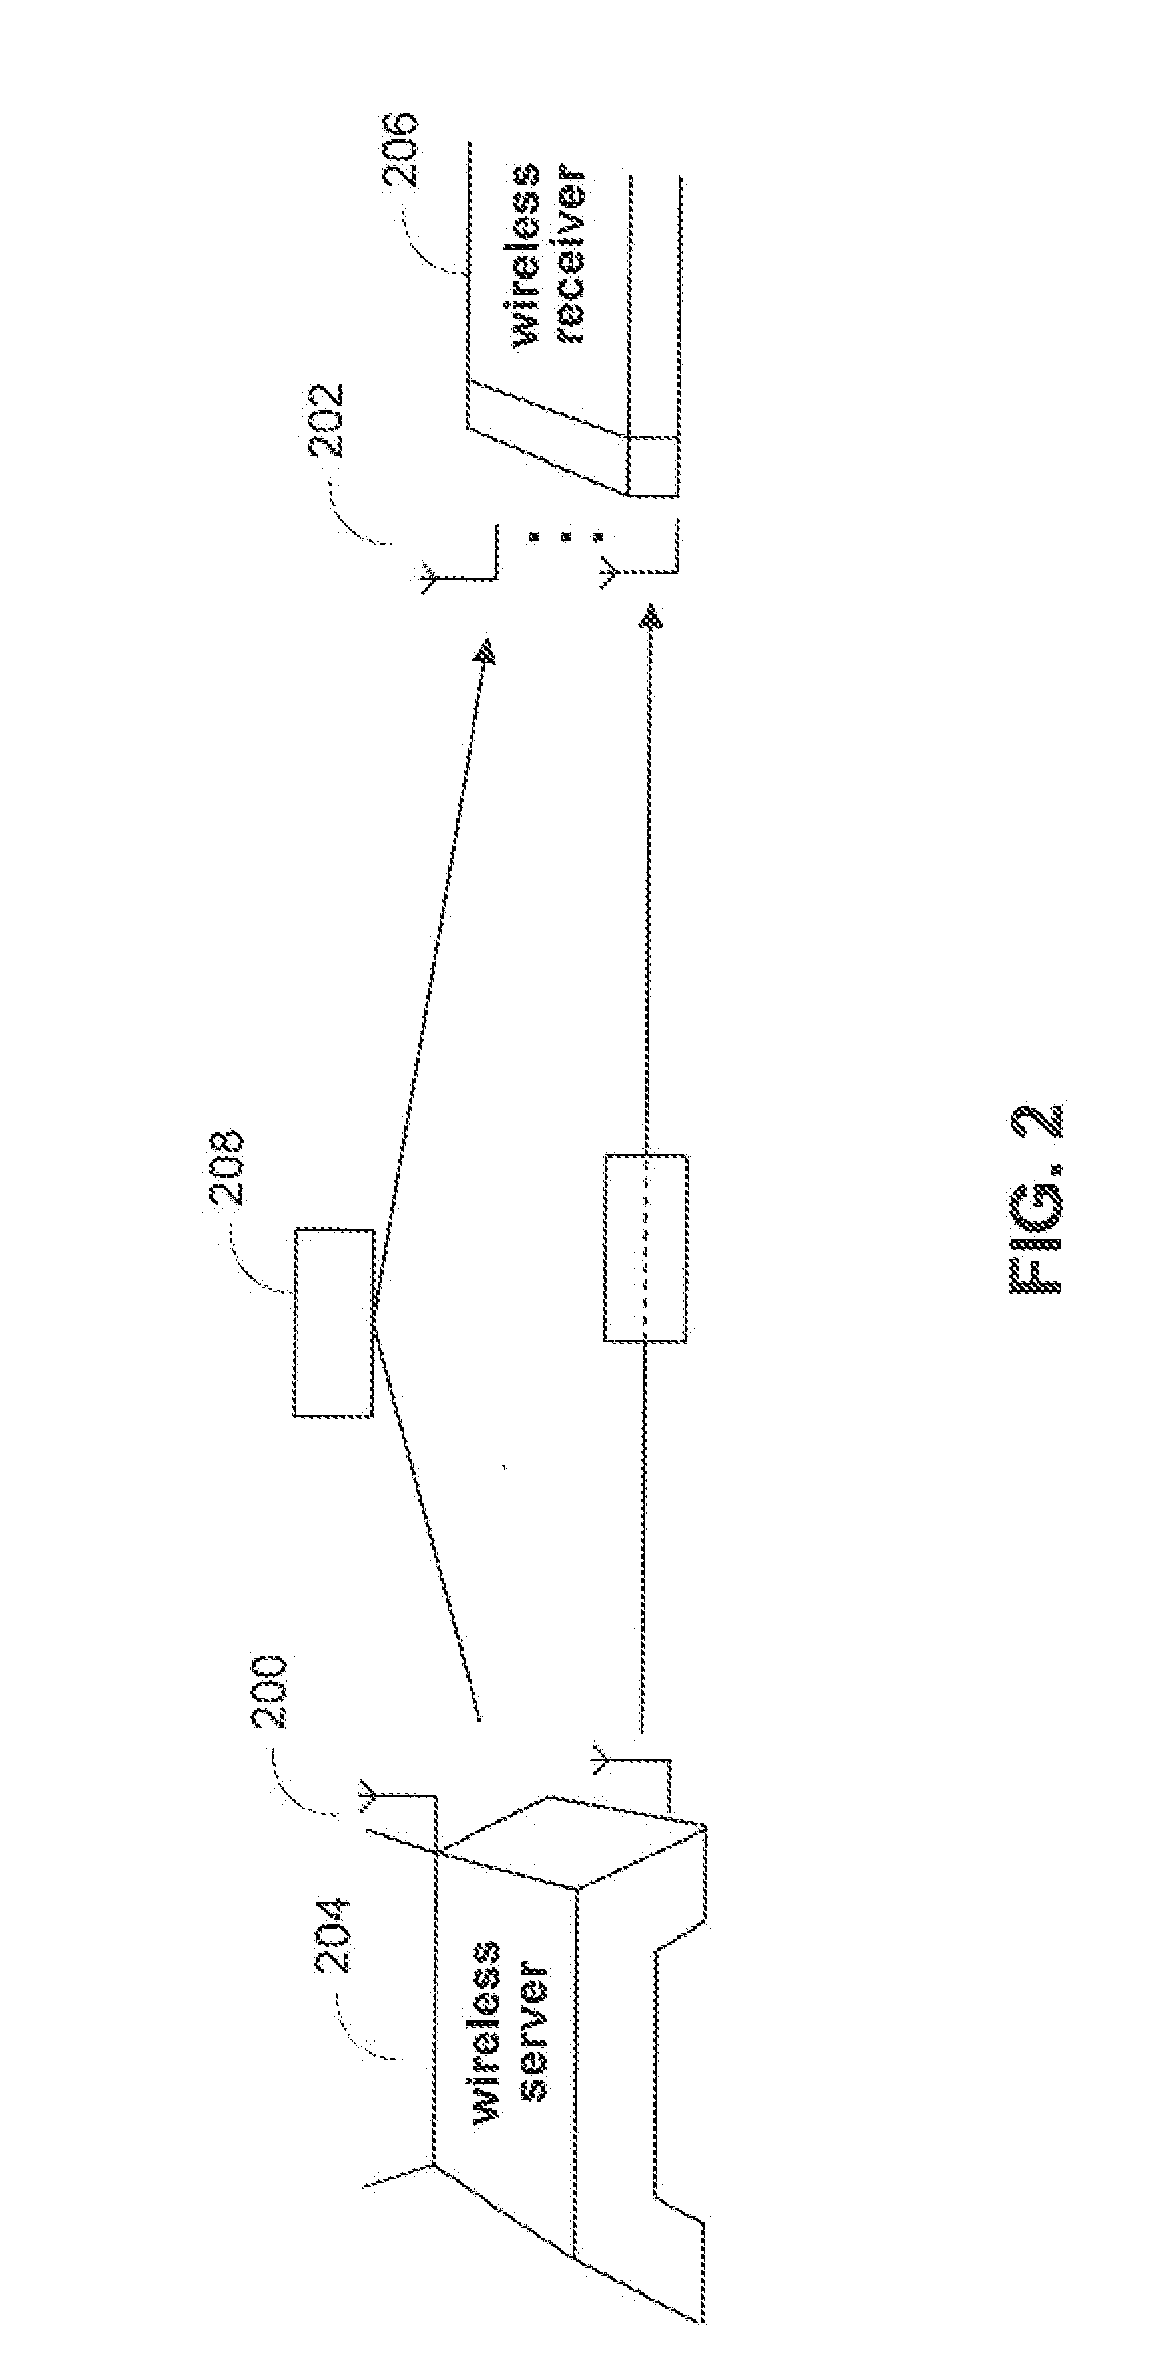 Decoding method for alamouti scheme with HARQ and/or repetition coding